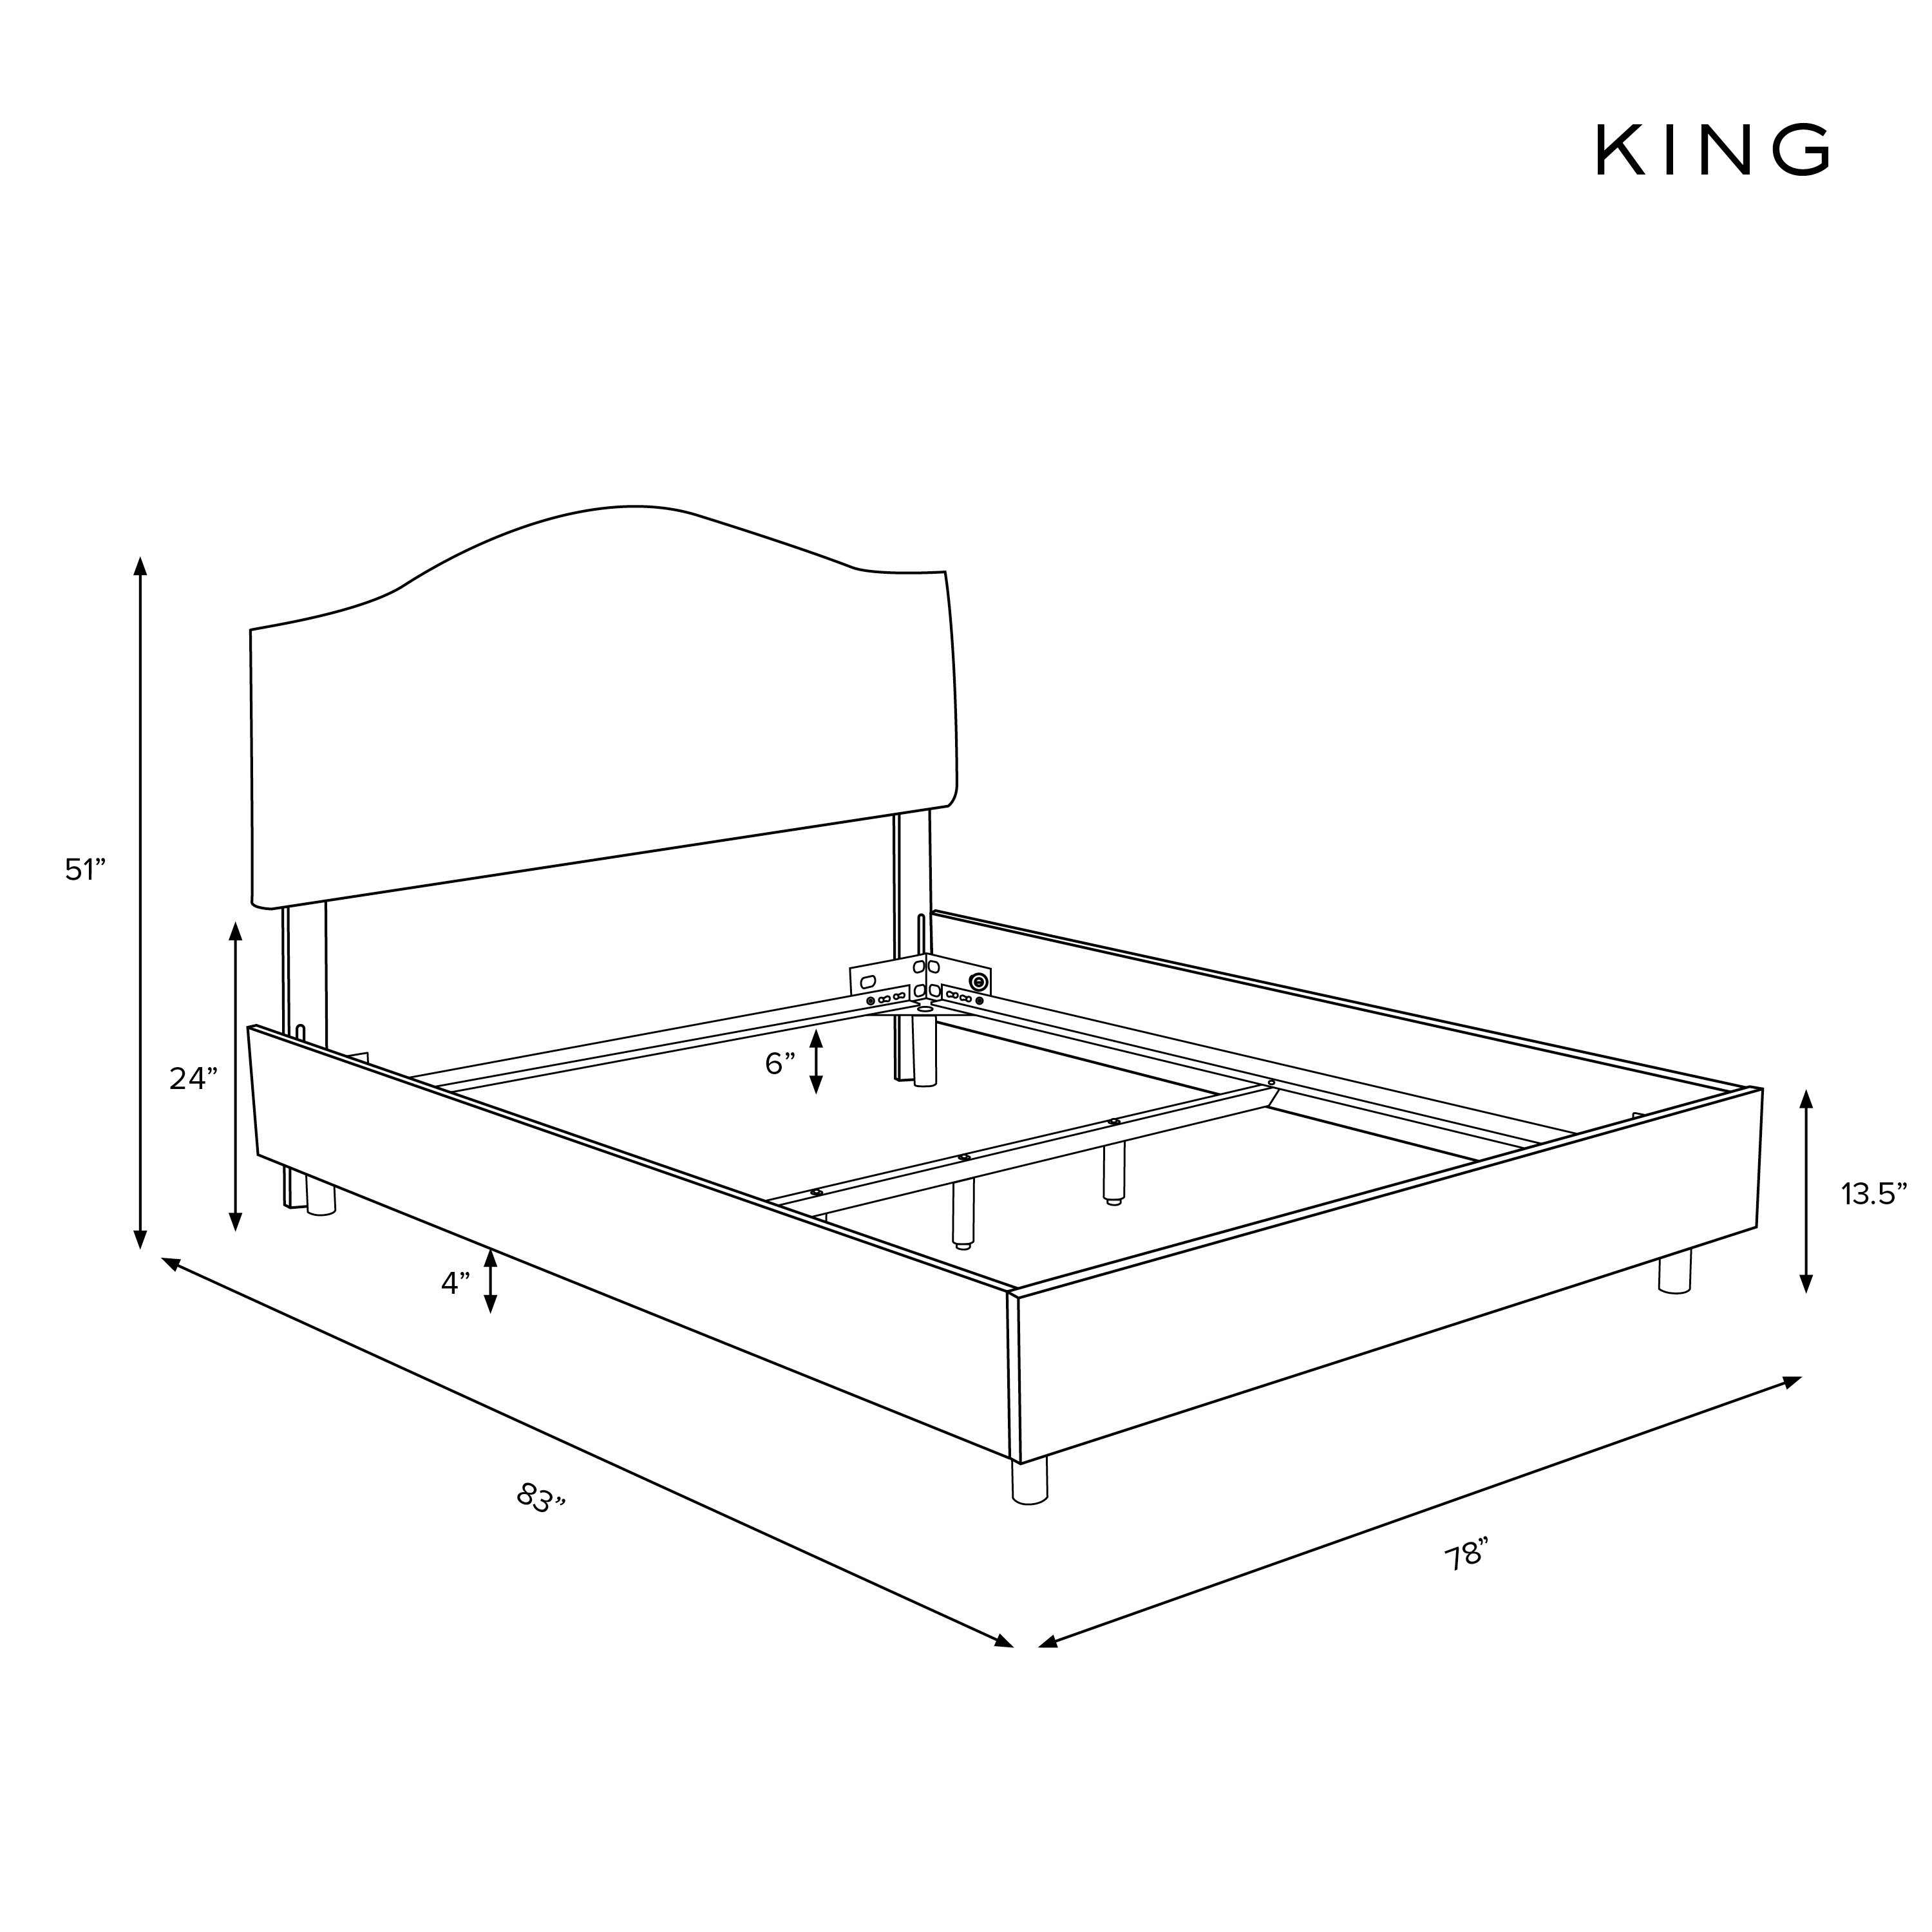 King Kenmore Bed in Zuma Pumice - Image 5